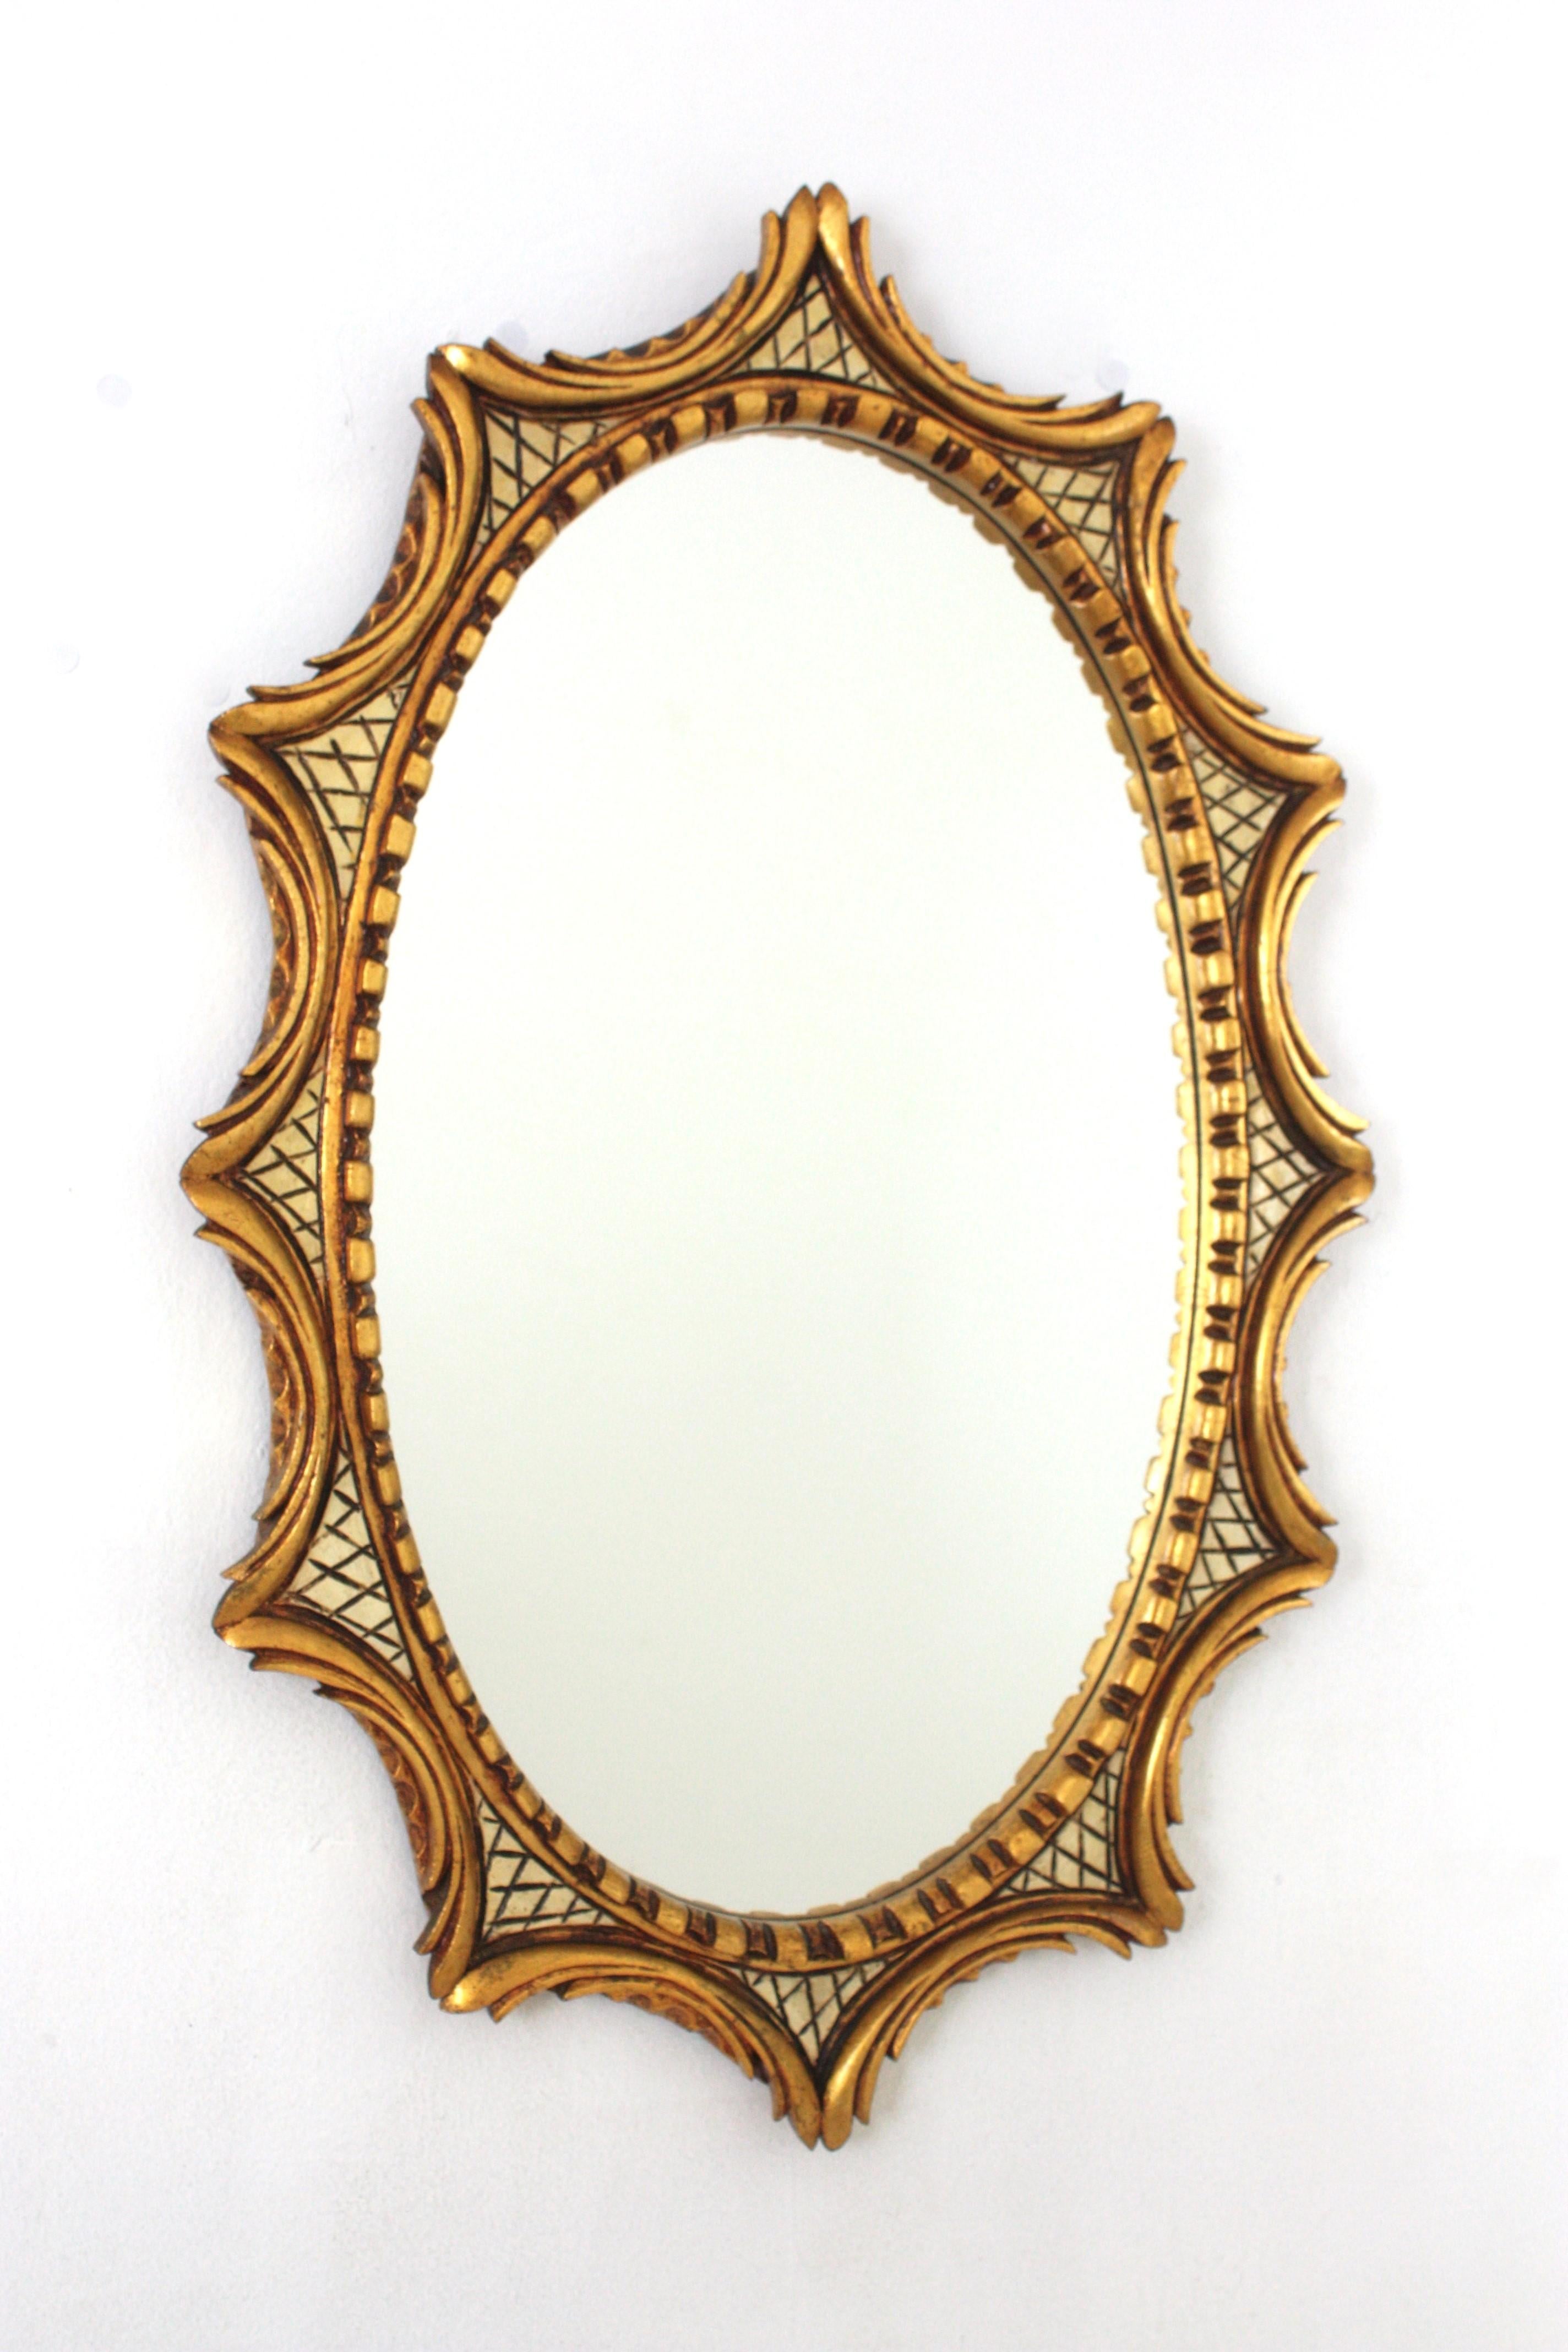 Hollywood Regency Giltwood Oval Sunburst Mirror, Spain, 1950s-1960s.
One of a kind gilt oval wall mirror framed in starburst or sunburst shape. Nicely carved foliage inspired scroll details with an scalloped pattern surrounding the glass. The frame